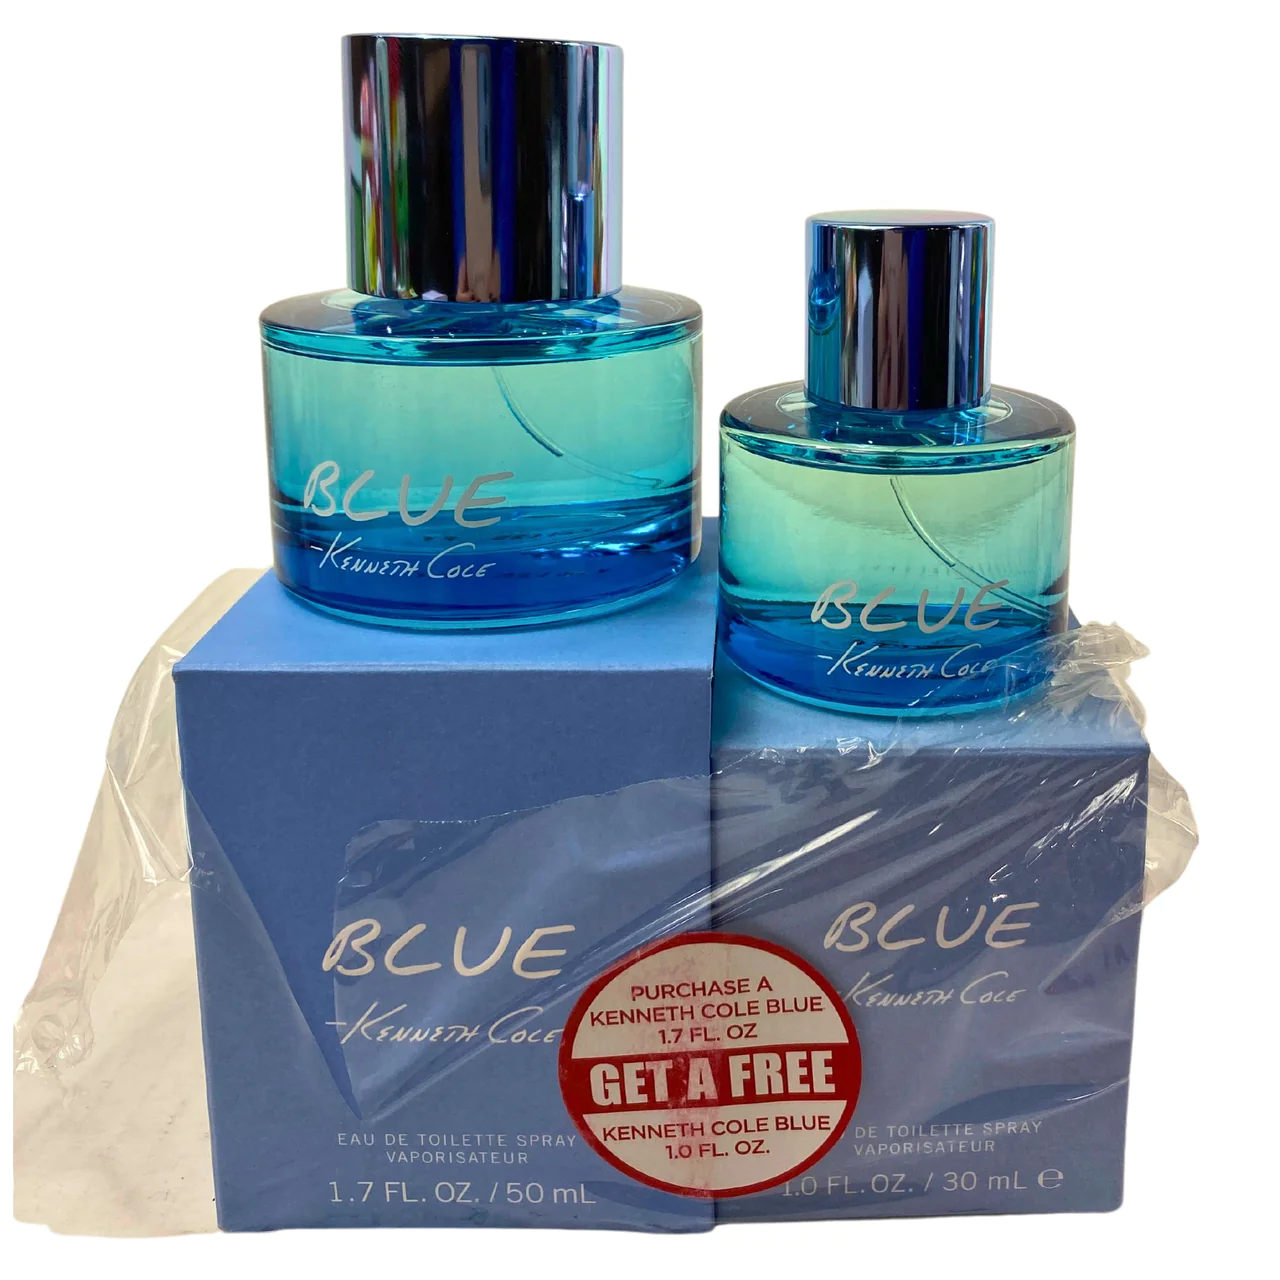 Kenneth Cole Blue 2-piece EDT Spray for Men, 1.7 Oz. and 1 oz Duo - $34.95